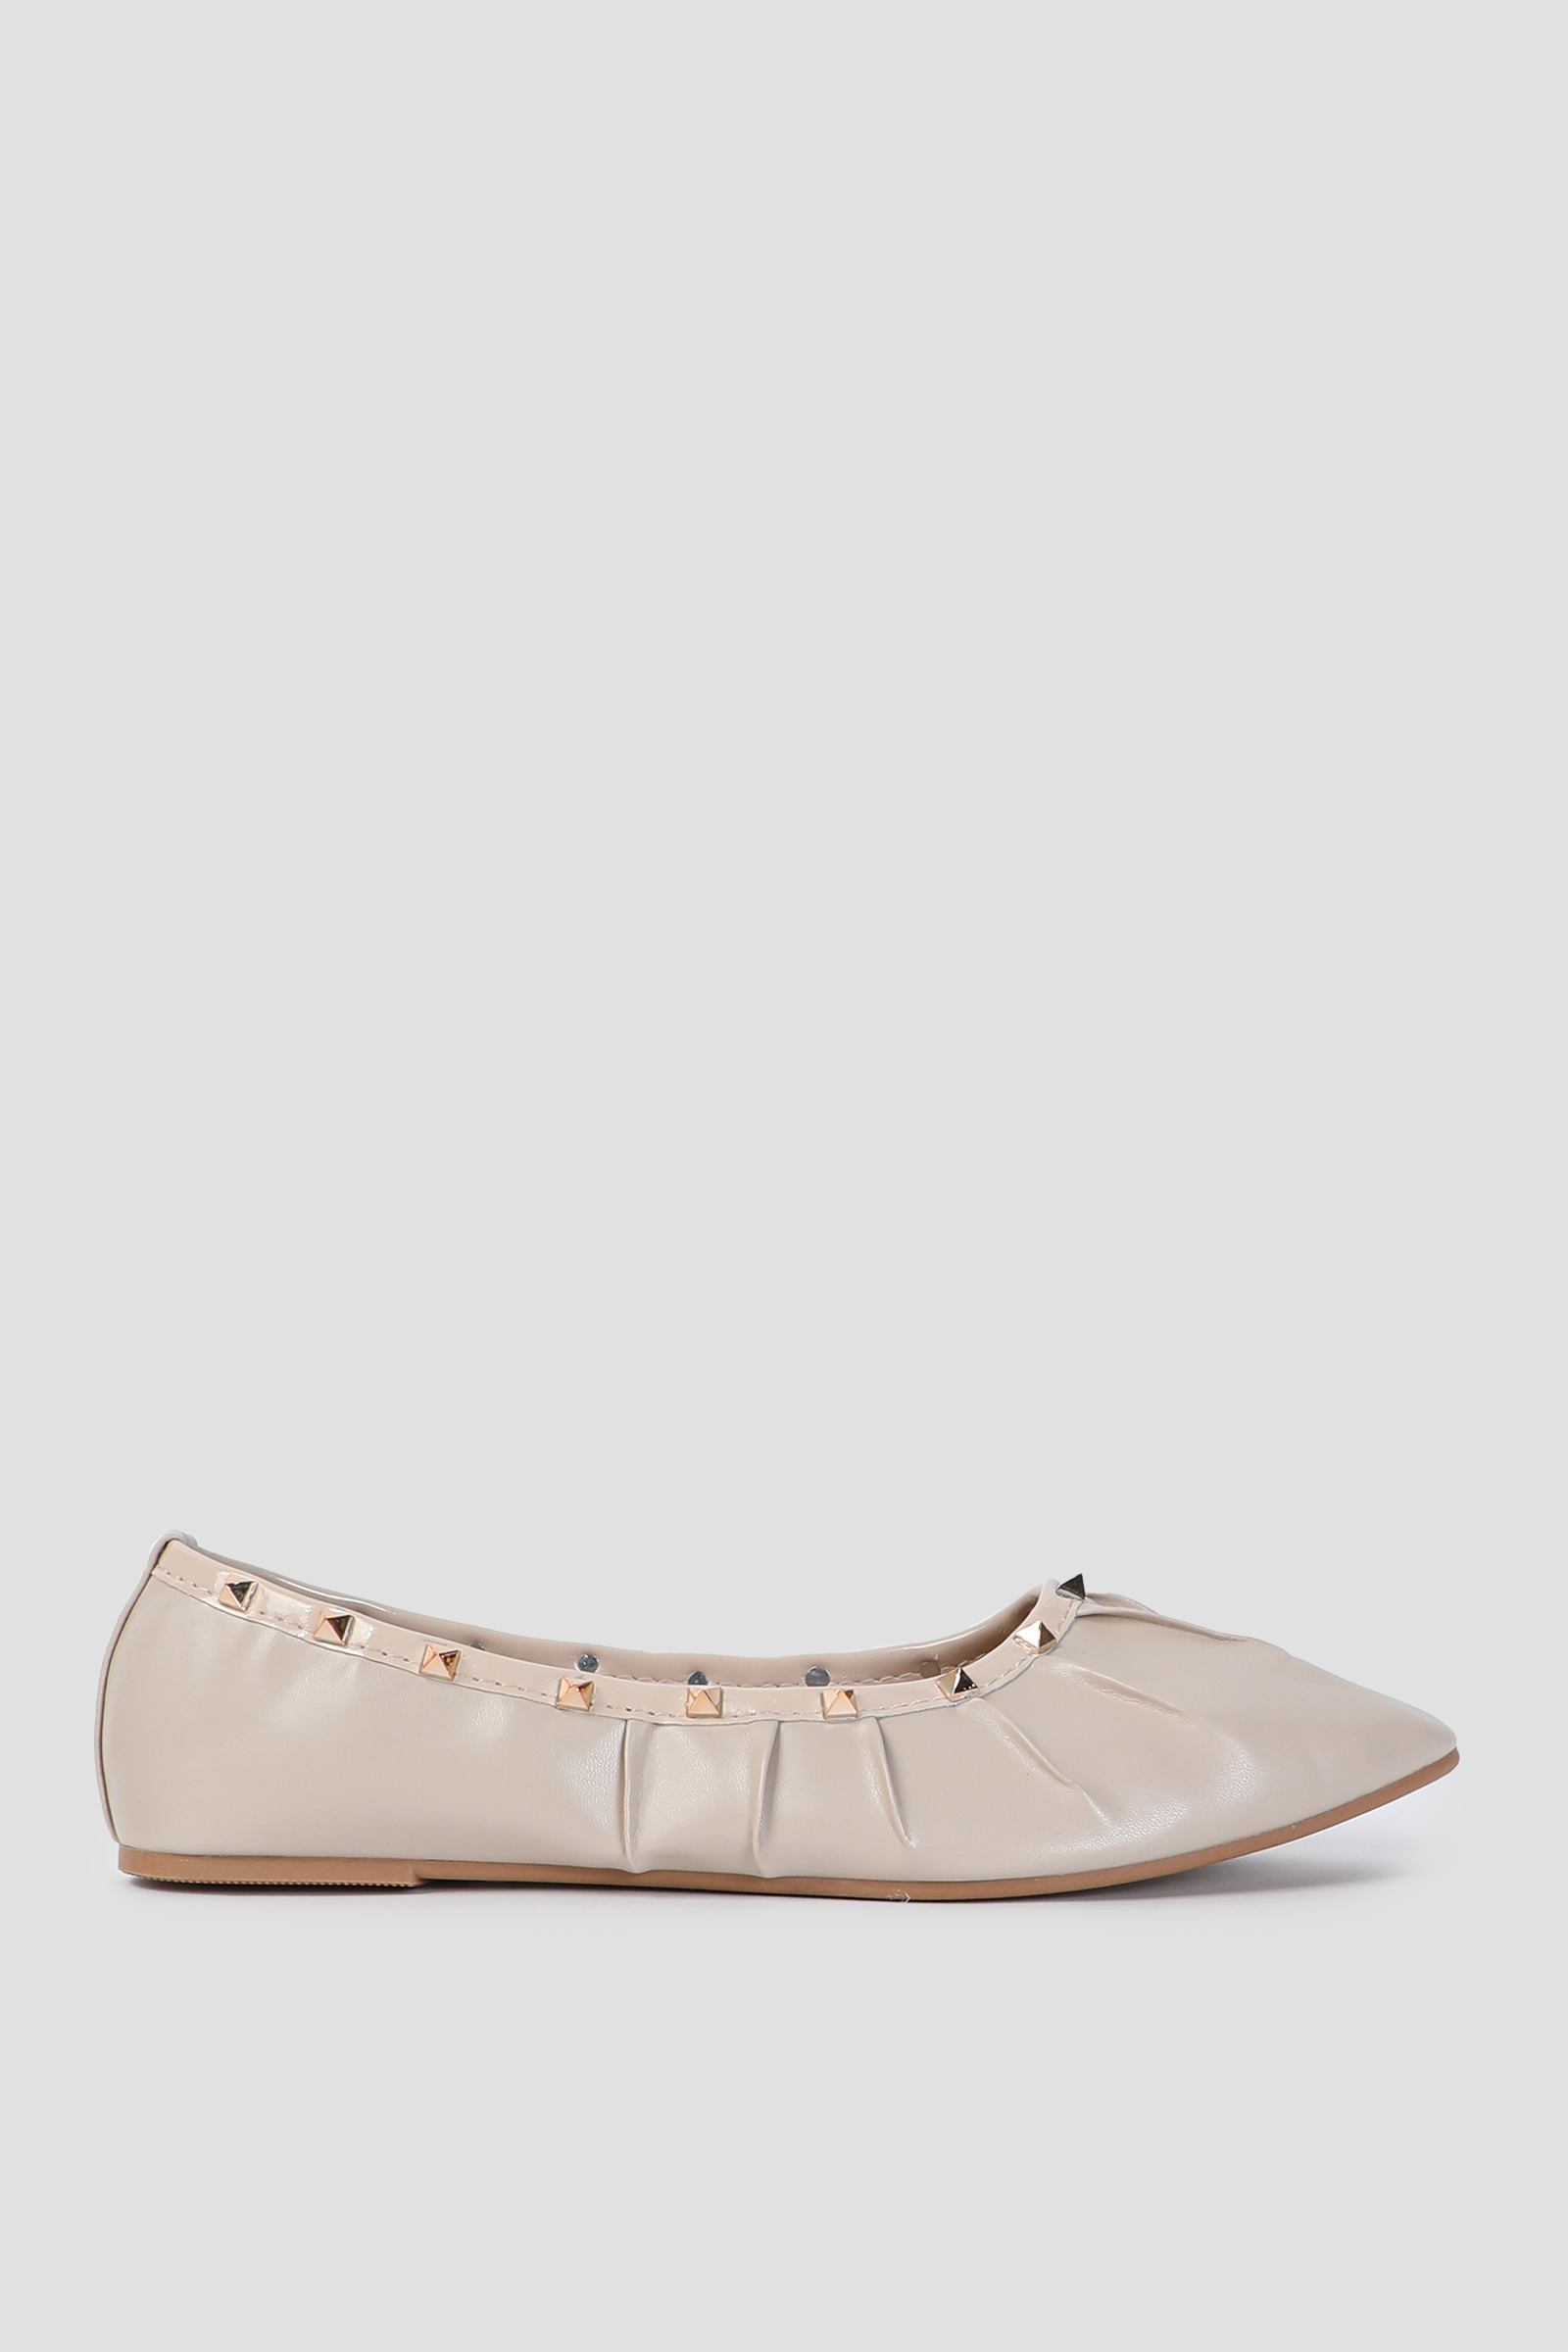 Ardene Pleated Flats with Stud Details in Beige | Size | Faux Leather/Rubber